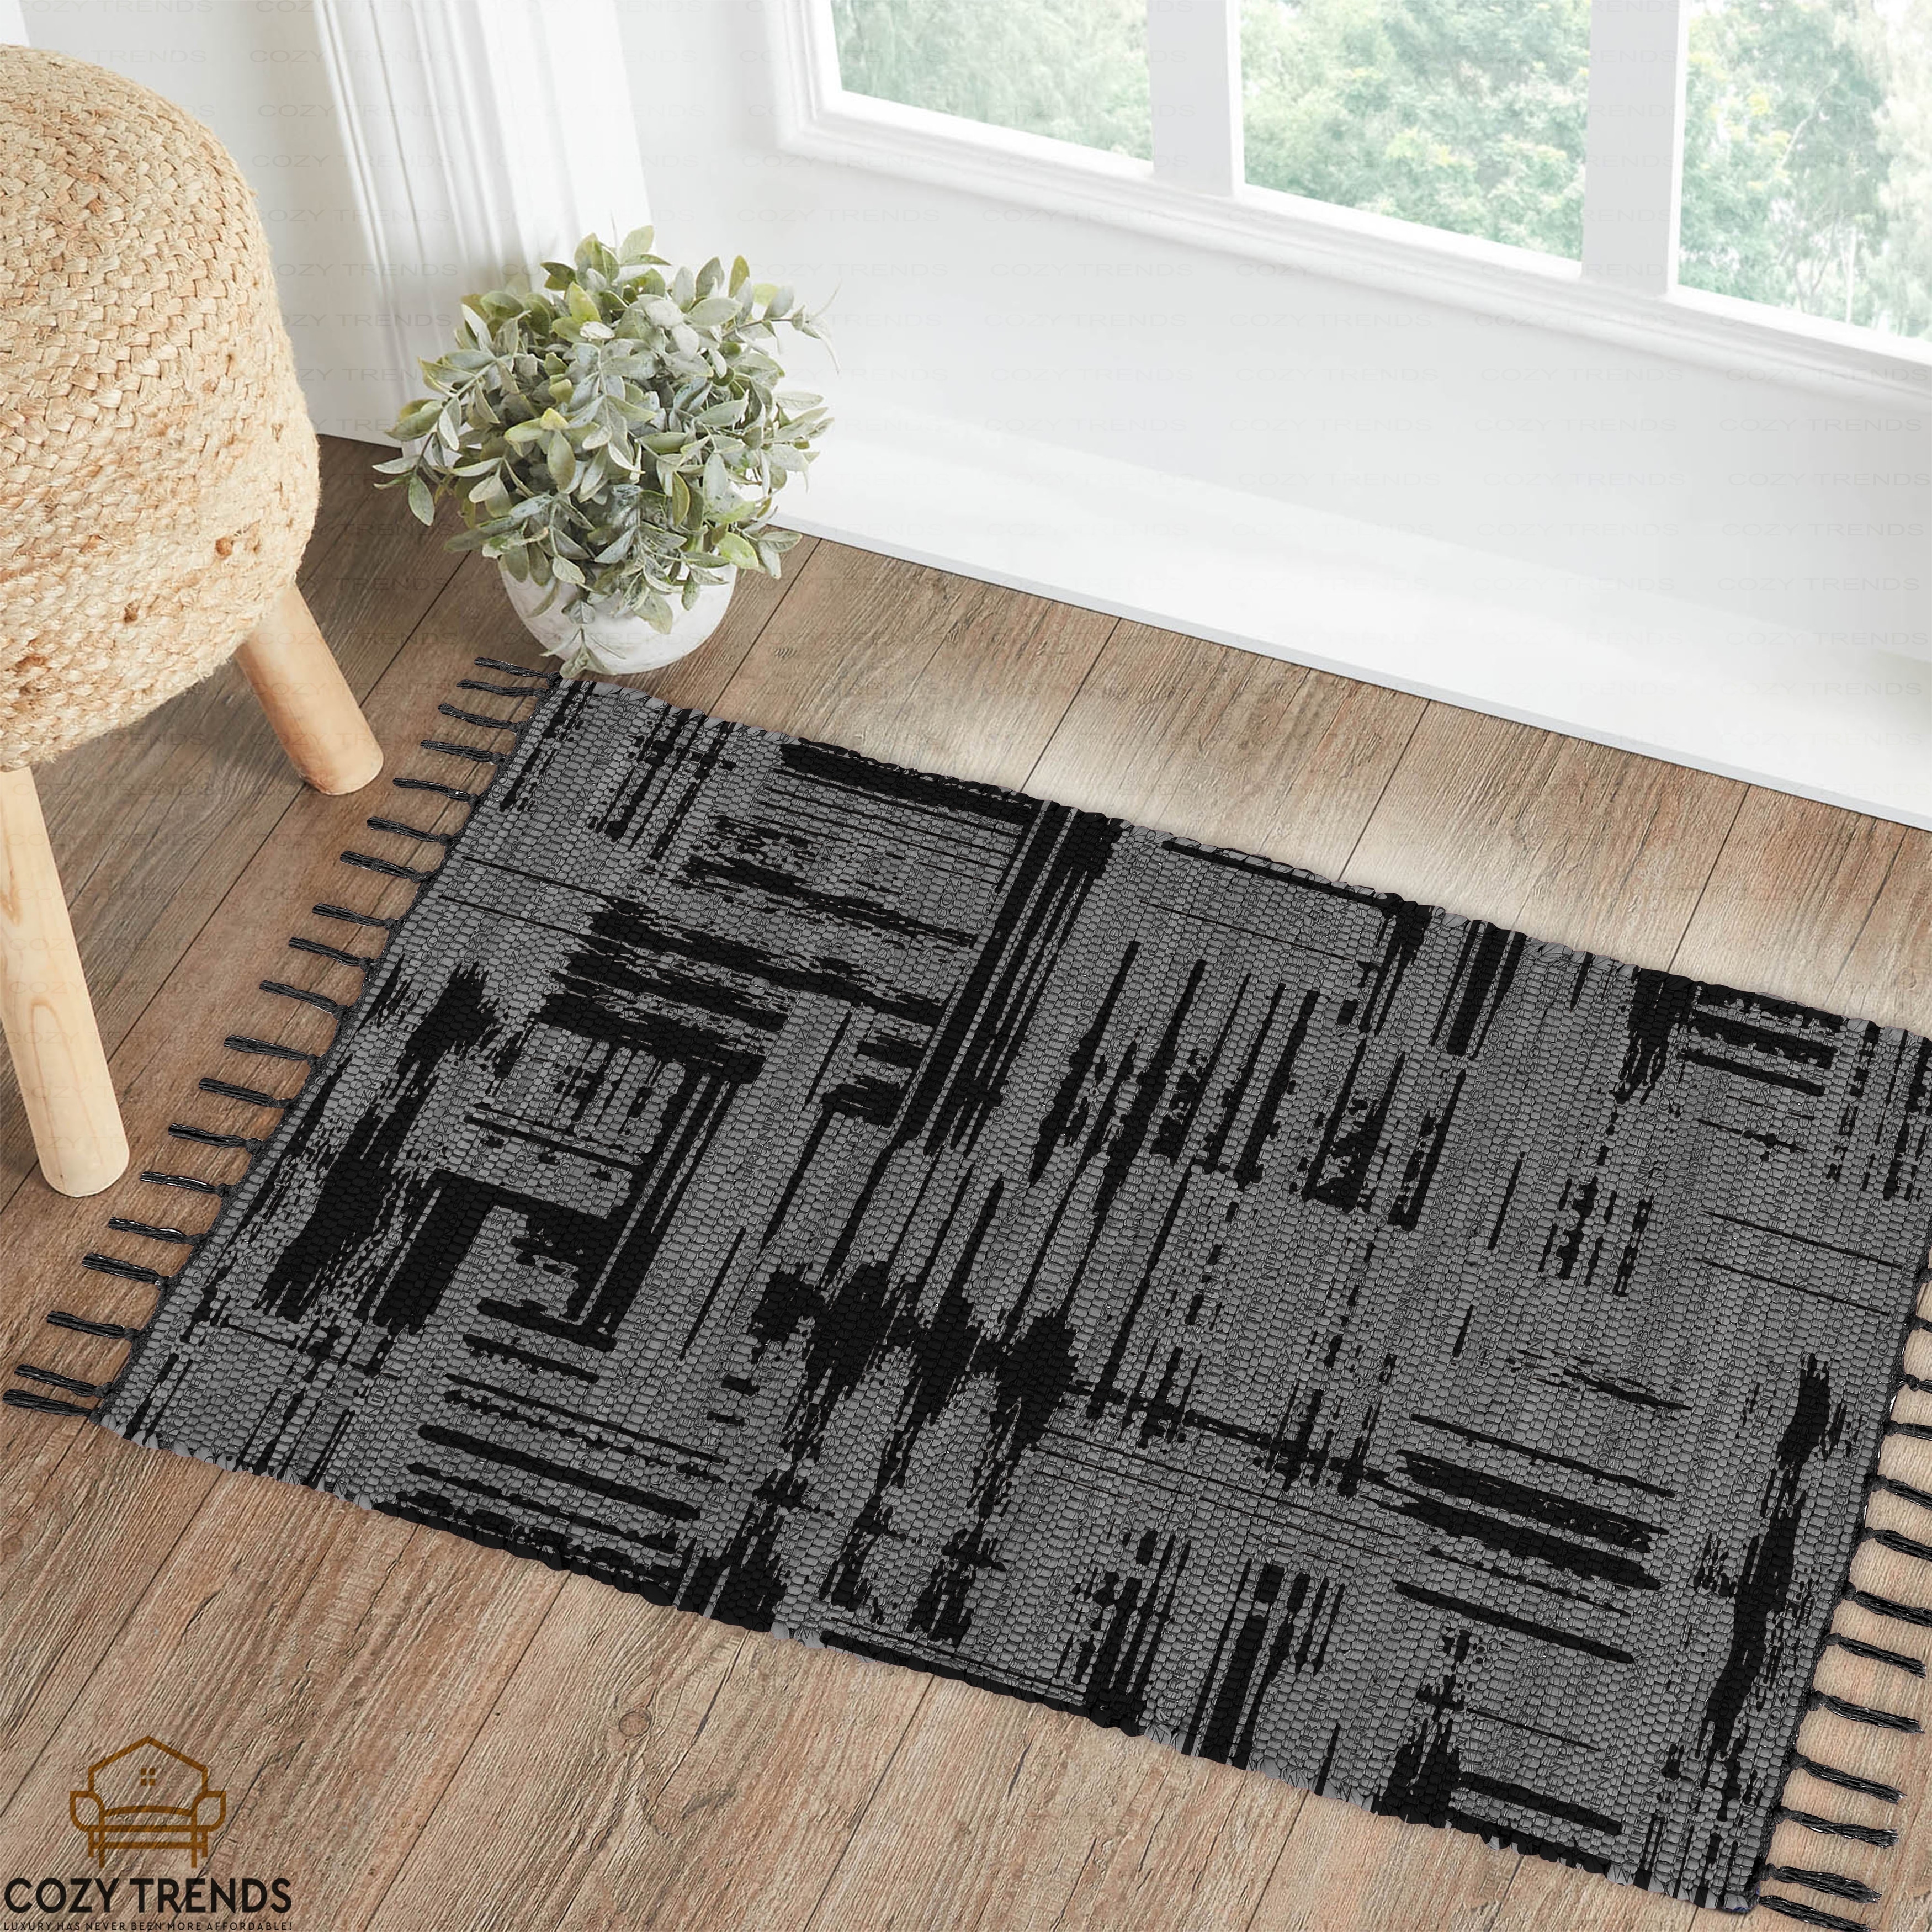 https://ak1.ostkcdn.com/images/products/is/images/direct/556cf1f0b3757f9a102940fffaa4cf0f0c0017b2/Boho-Rug-2%27x3%27%2C-Printed-Small-Rug-with-Tassel-for-Bedroom%2C-Bathroom%2C-Hallway%2C-Laundry%2C-Entryway-Washable-Cotton-Woven-Throw-Rug.jpg